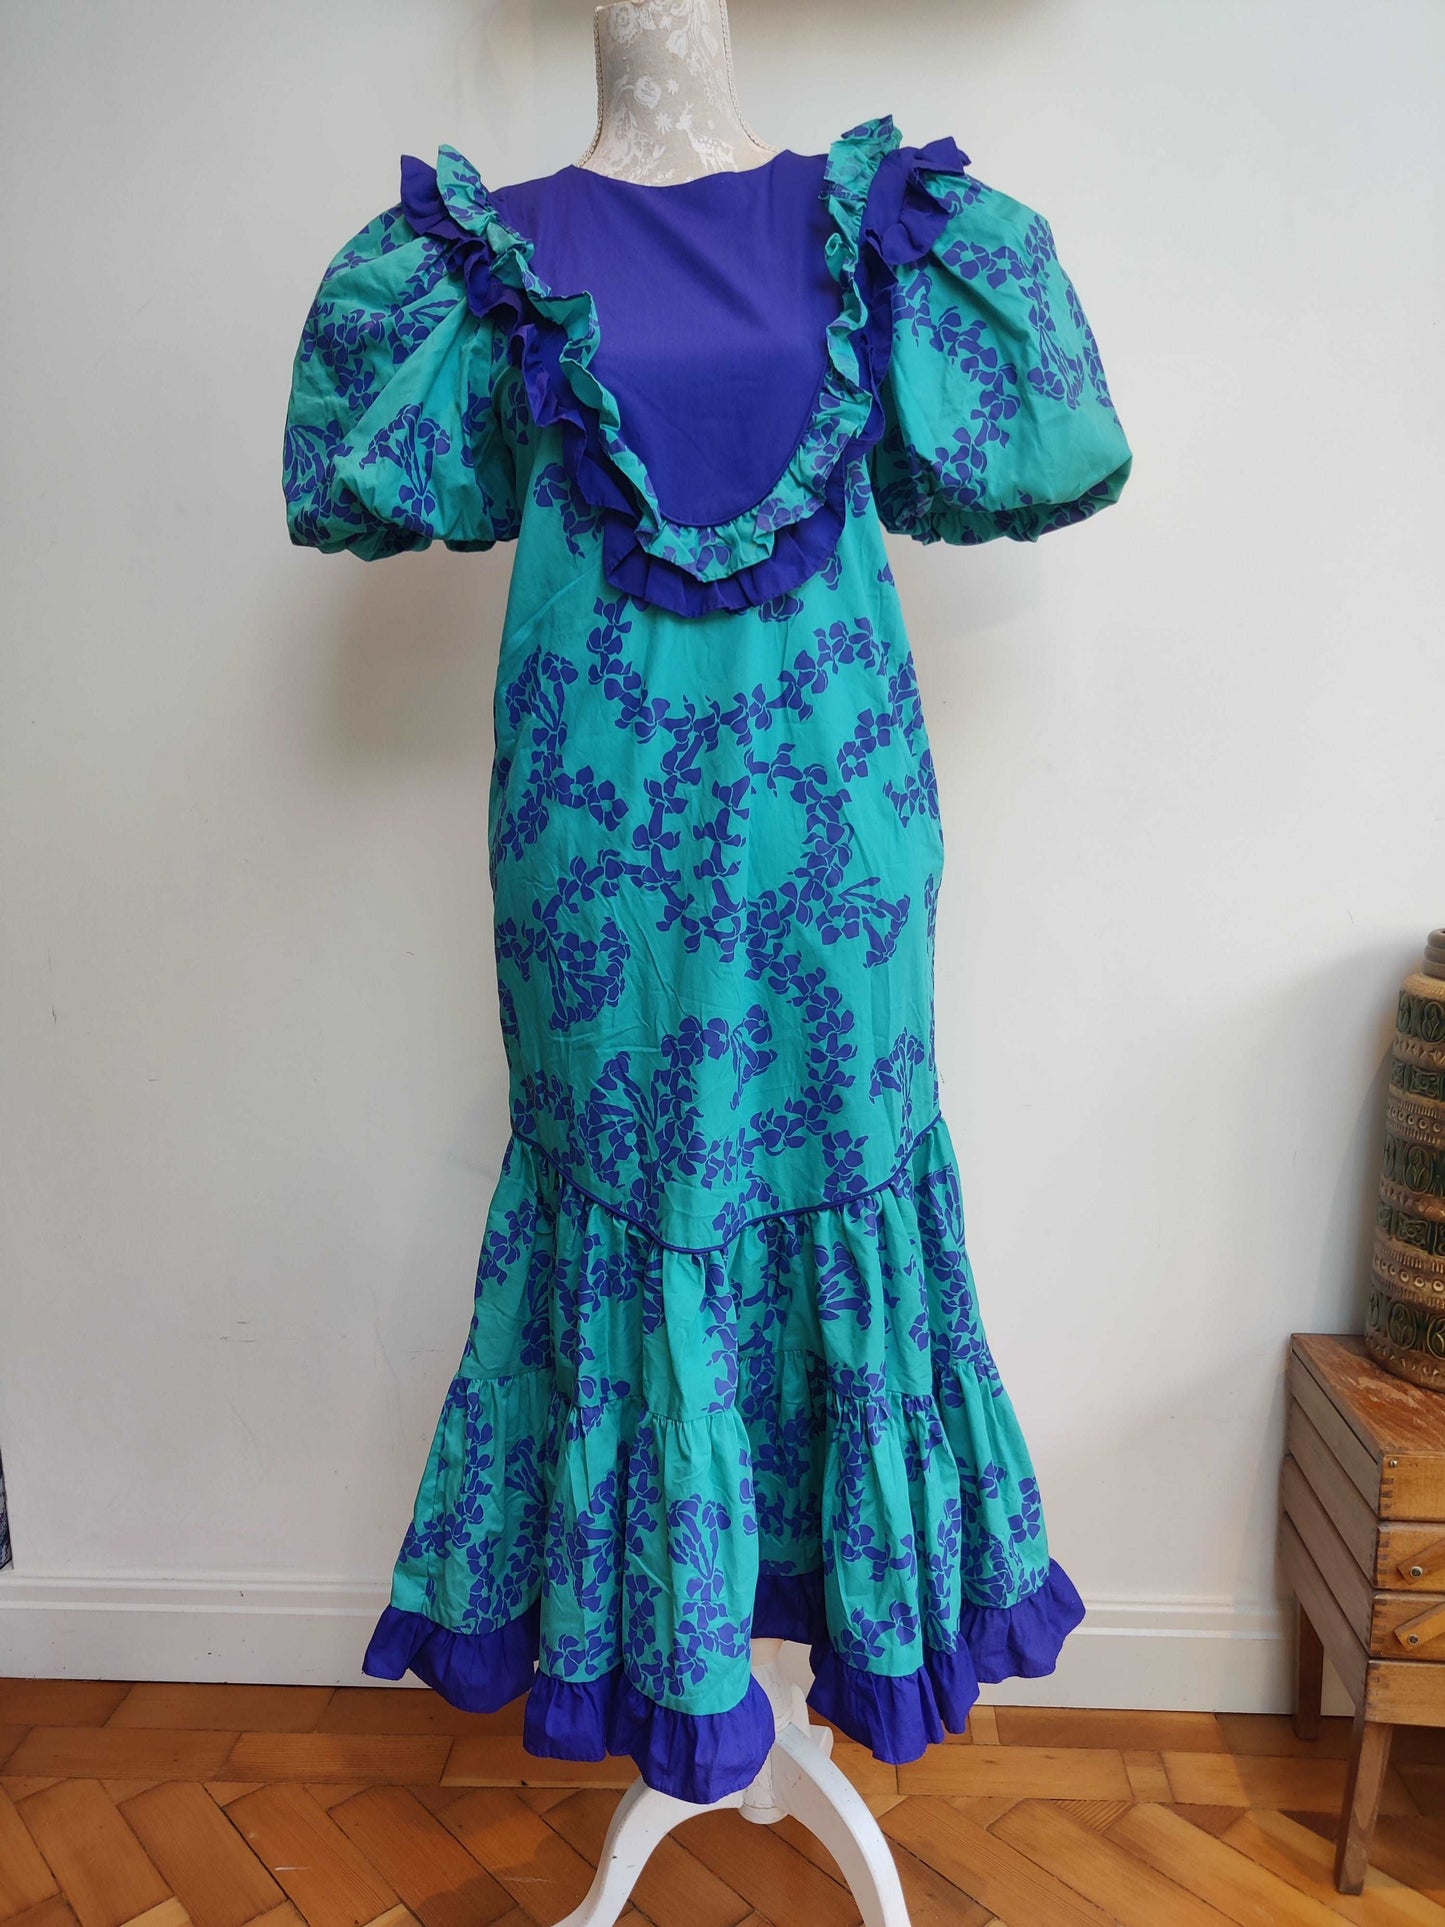 Vintage floral summer dress with puff sleeves